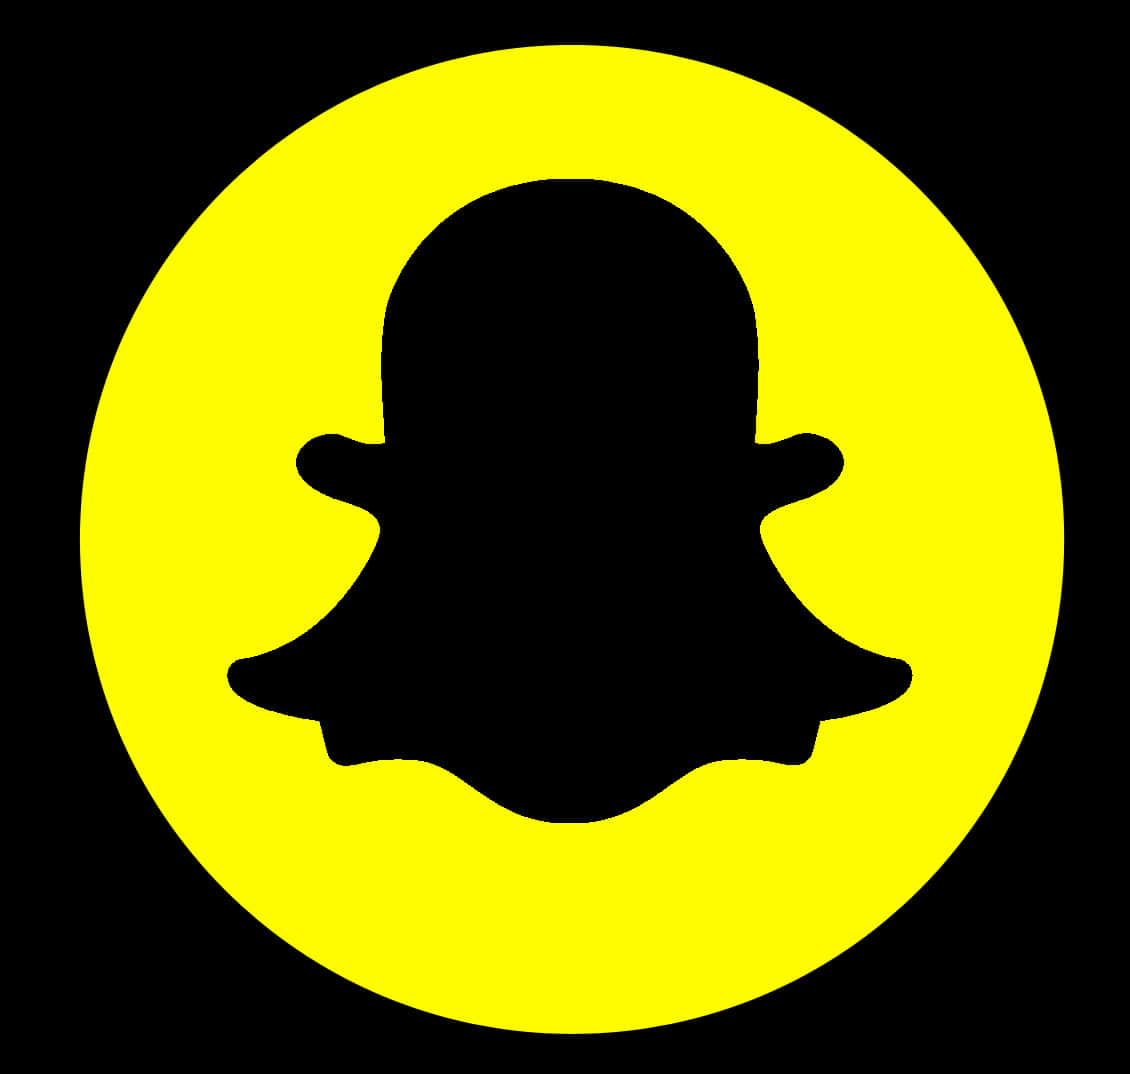 A Black Silhouette Of A Person's Head In A Yellow Circle